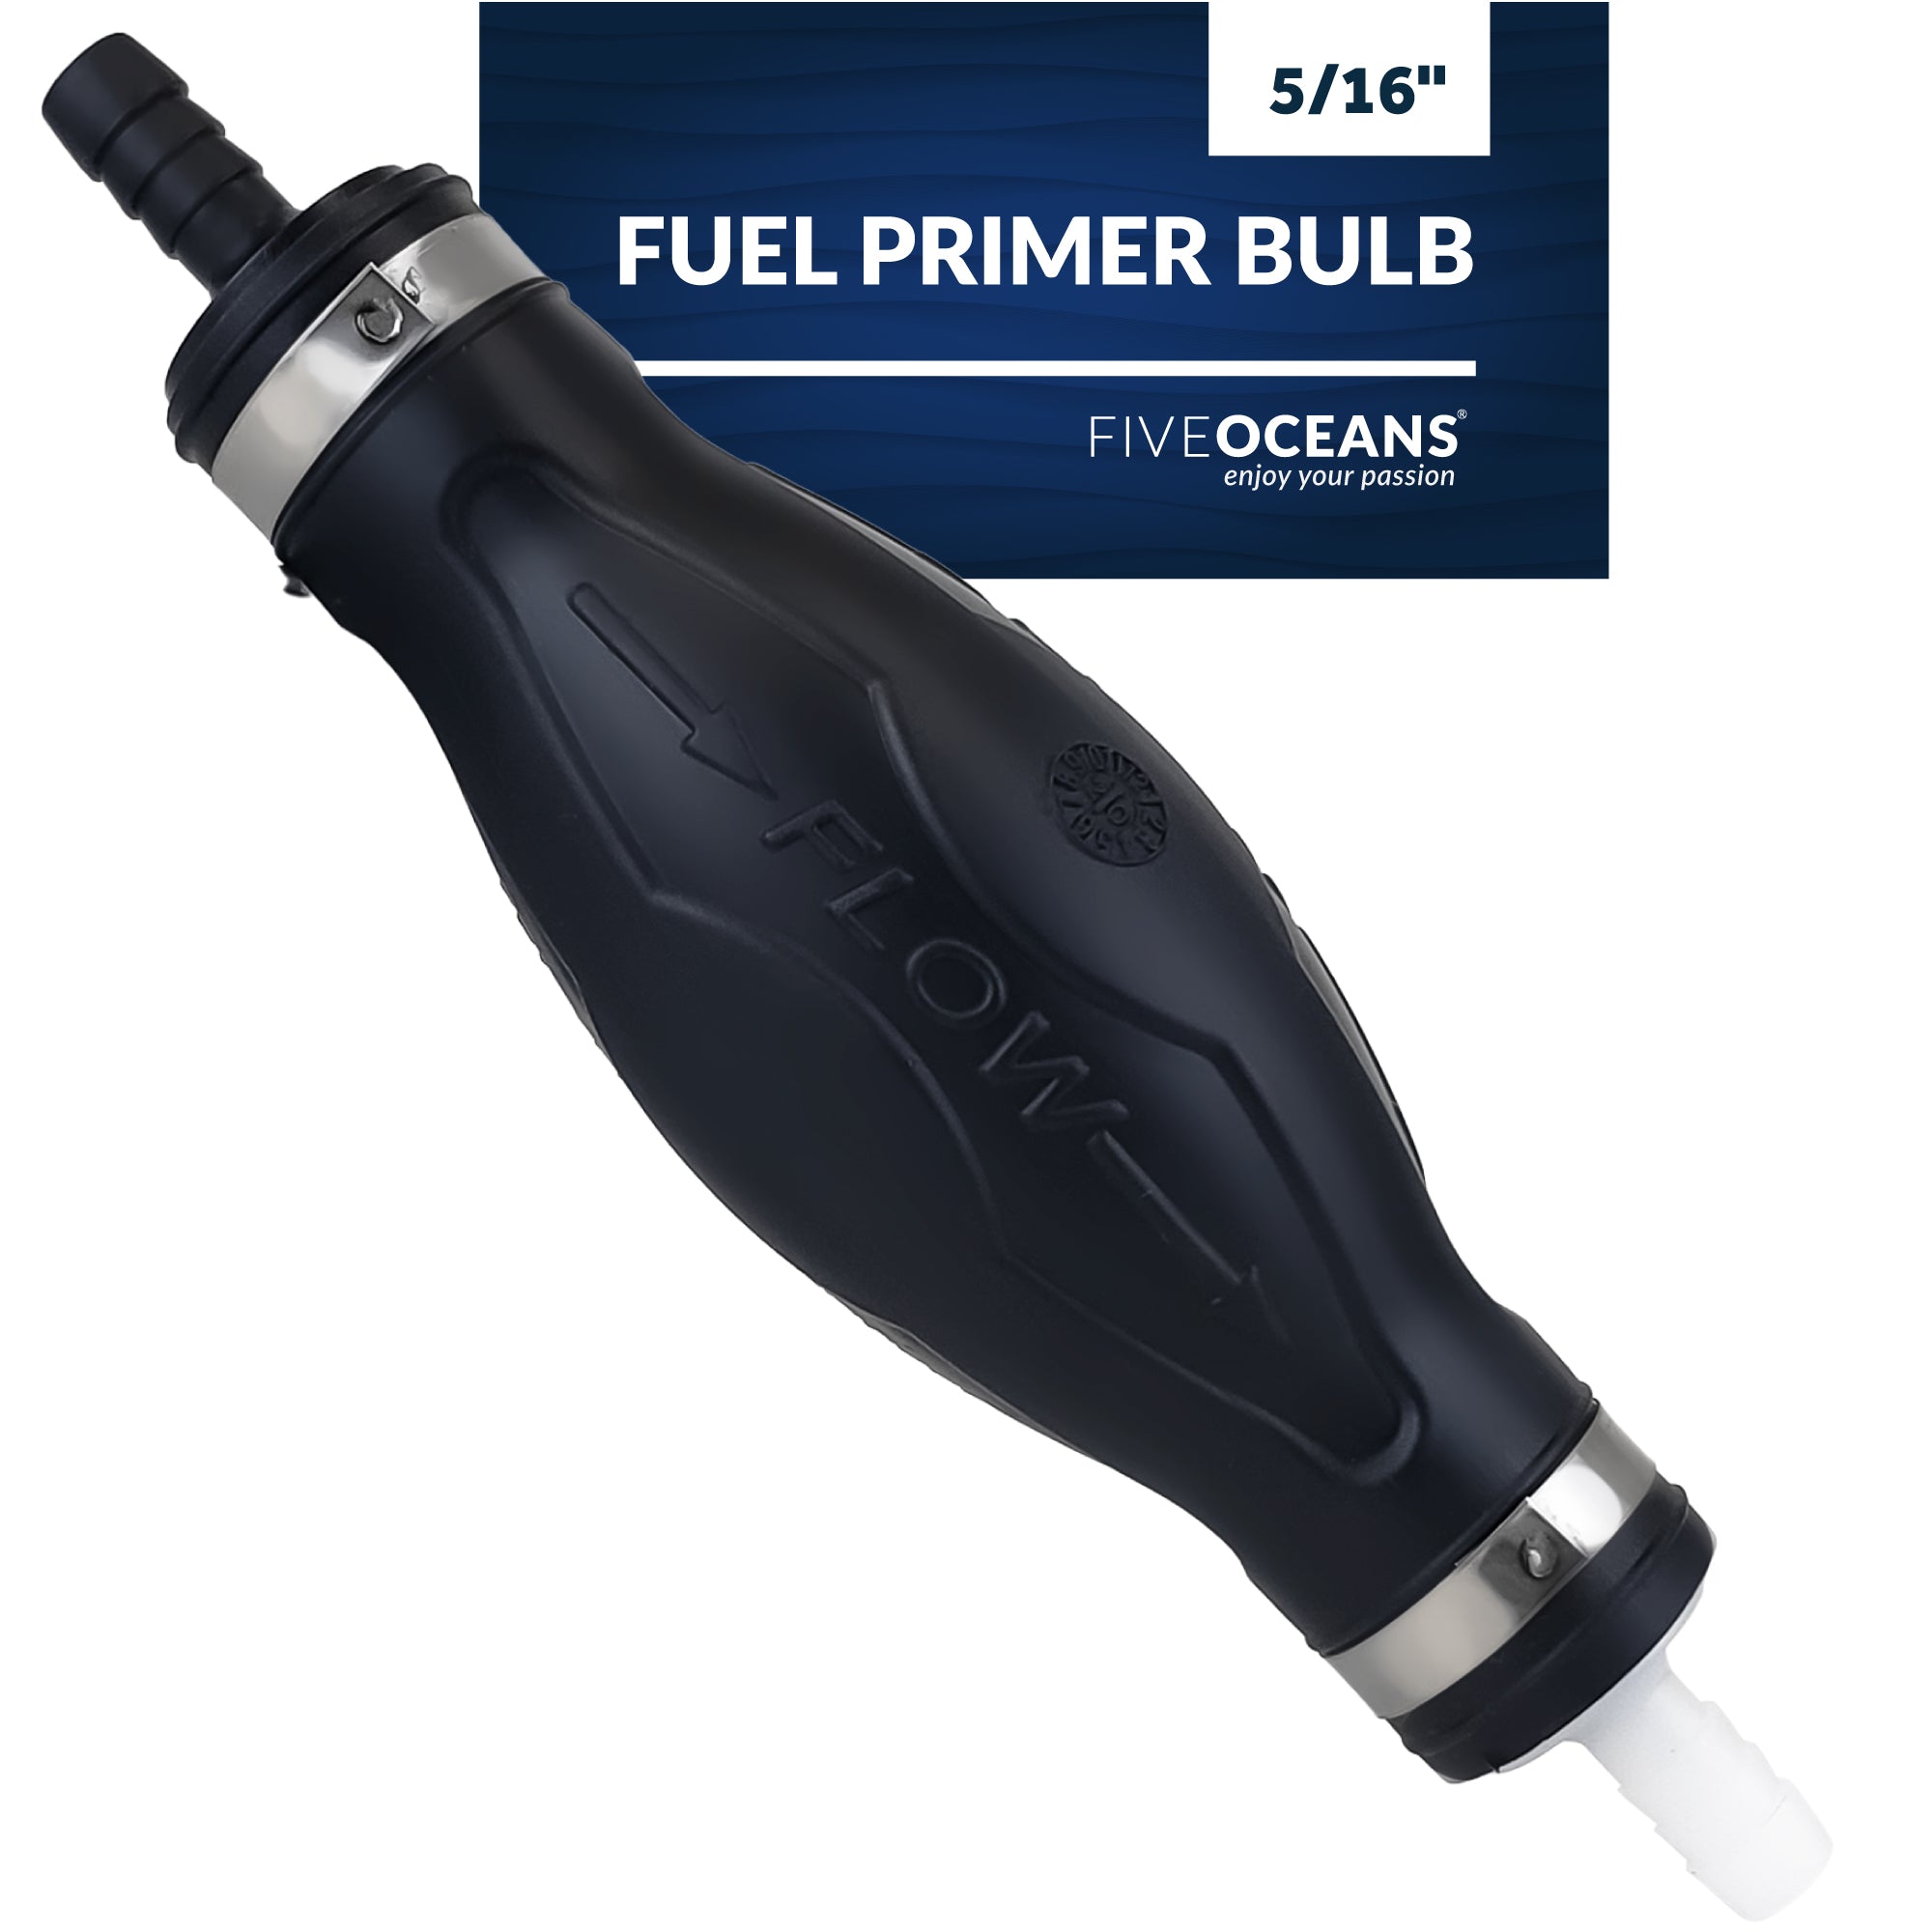 5/16" Fuel Primer Bulb, Large EPA/CARB Approved - FO4516